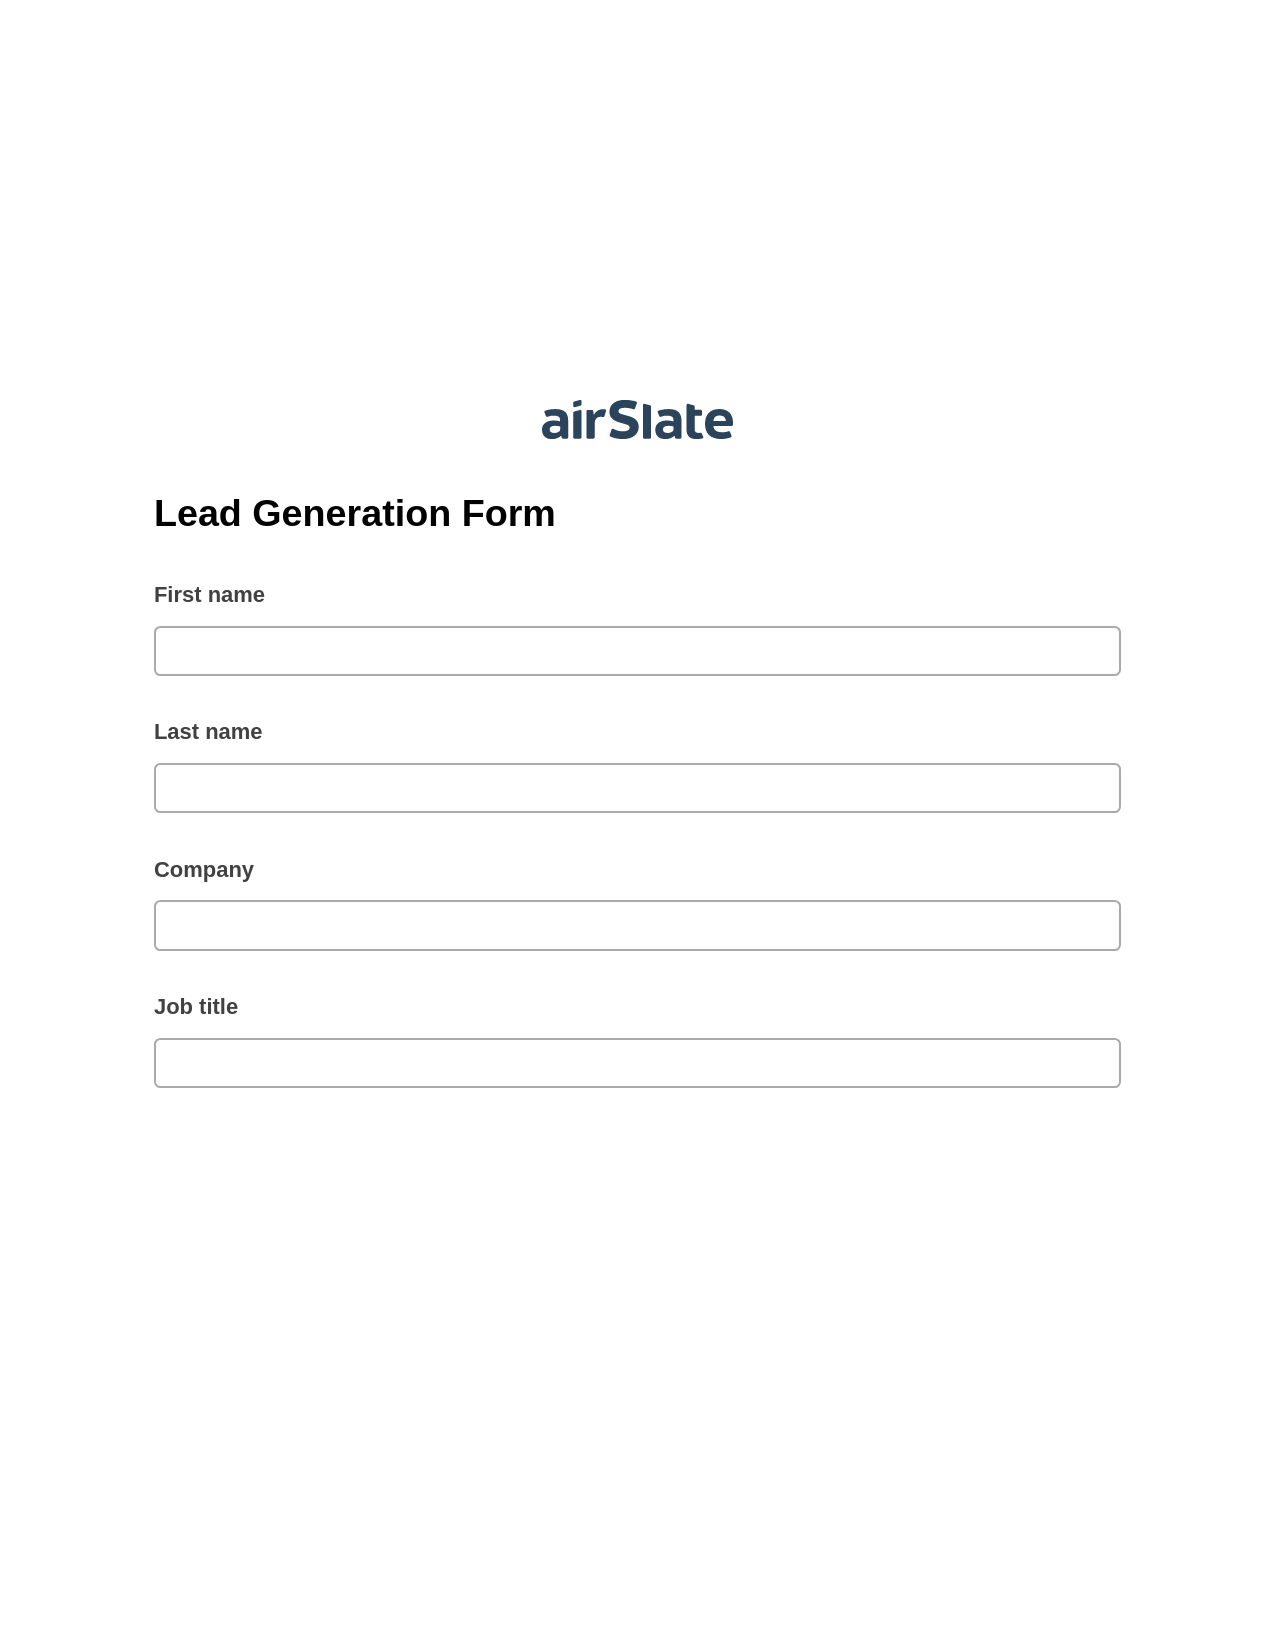 Lead Generation Form Pre-fill Document Bot, Create slate from another Flow Bot, Export to WebMerge Bot